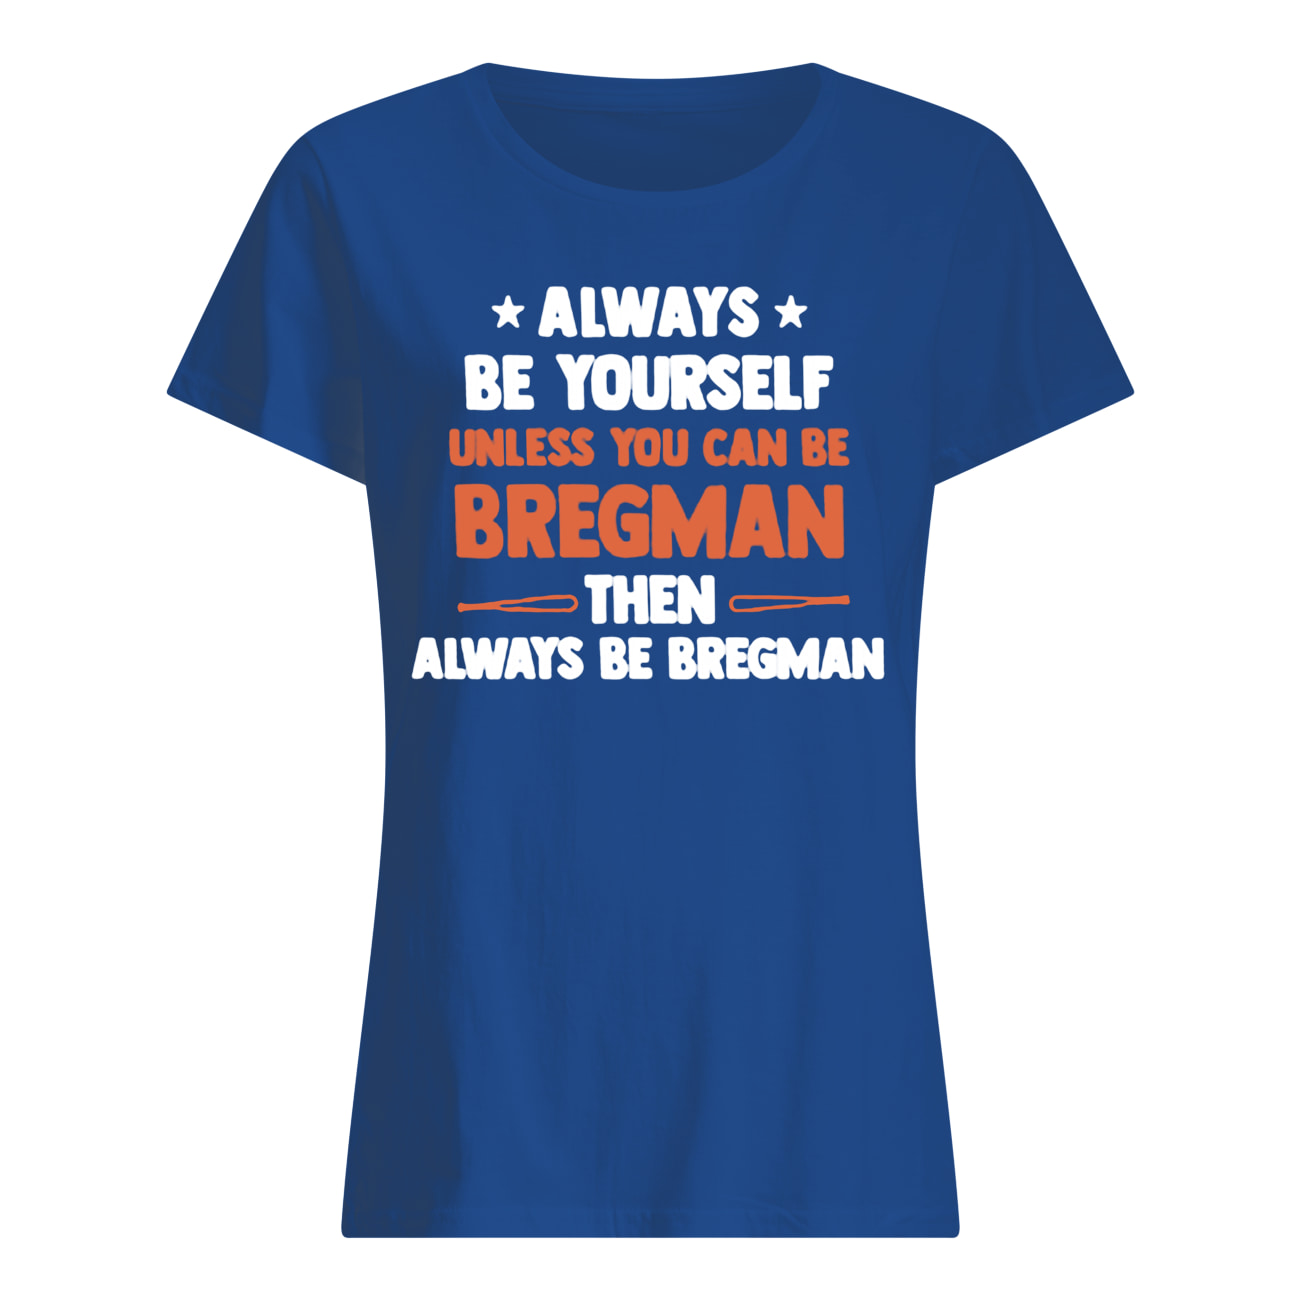 Always be yourself unless you can be bregman then always be bregman womens shirt